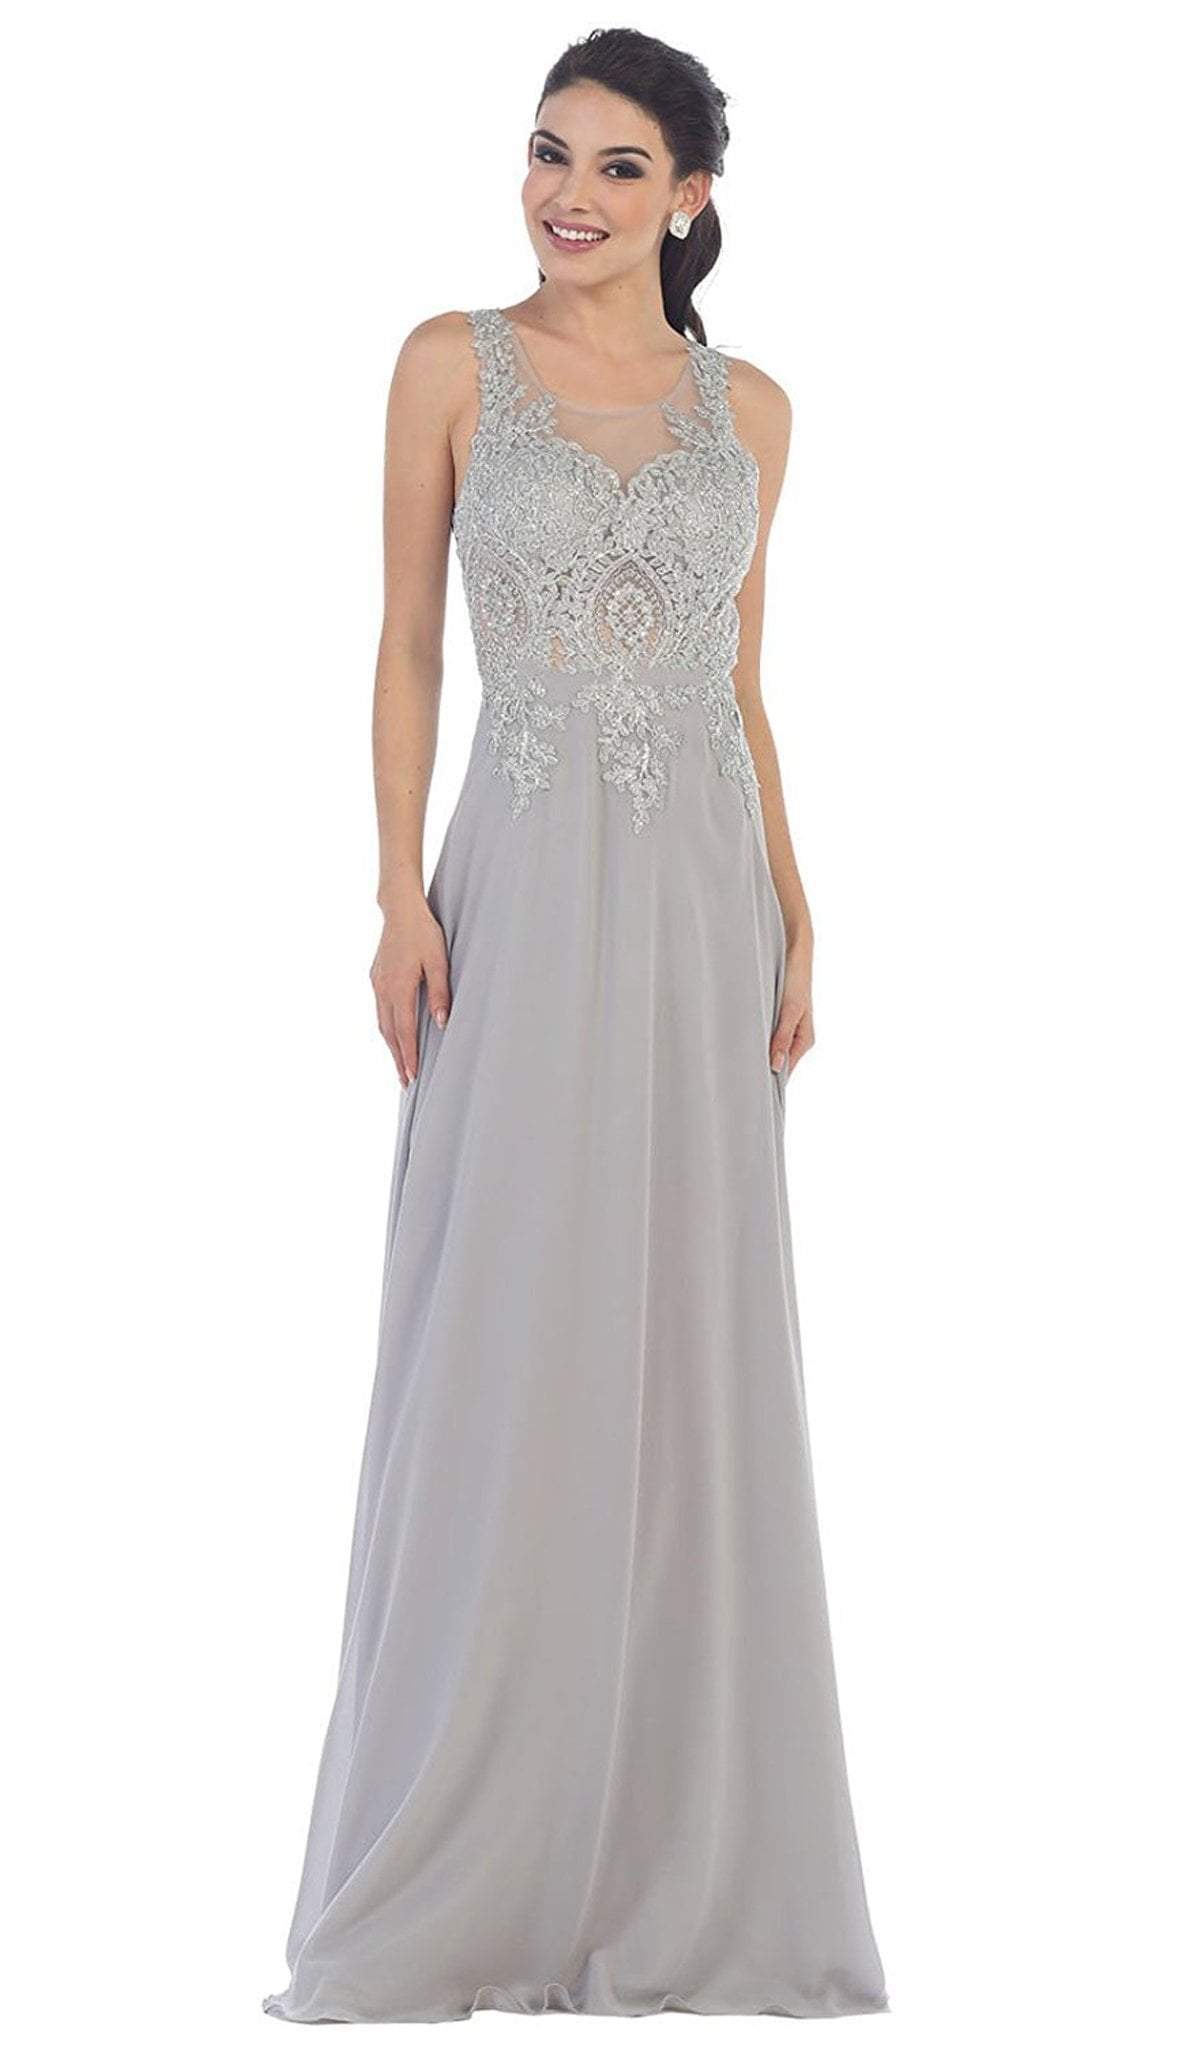 May Queen - Illusion Ornate Lace Prom Gown Special Occasion Dress 4 / Silver